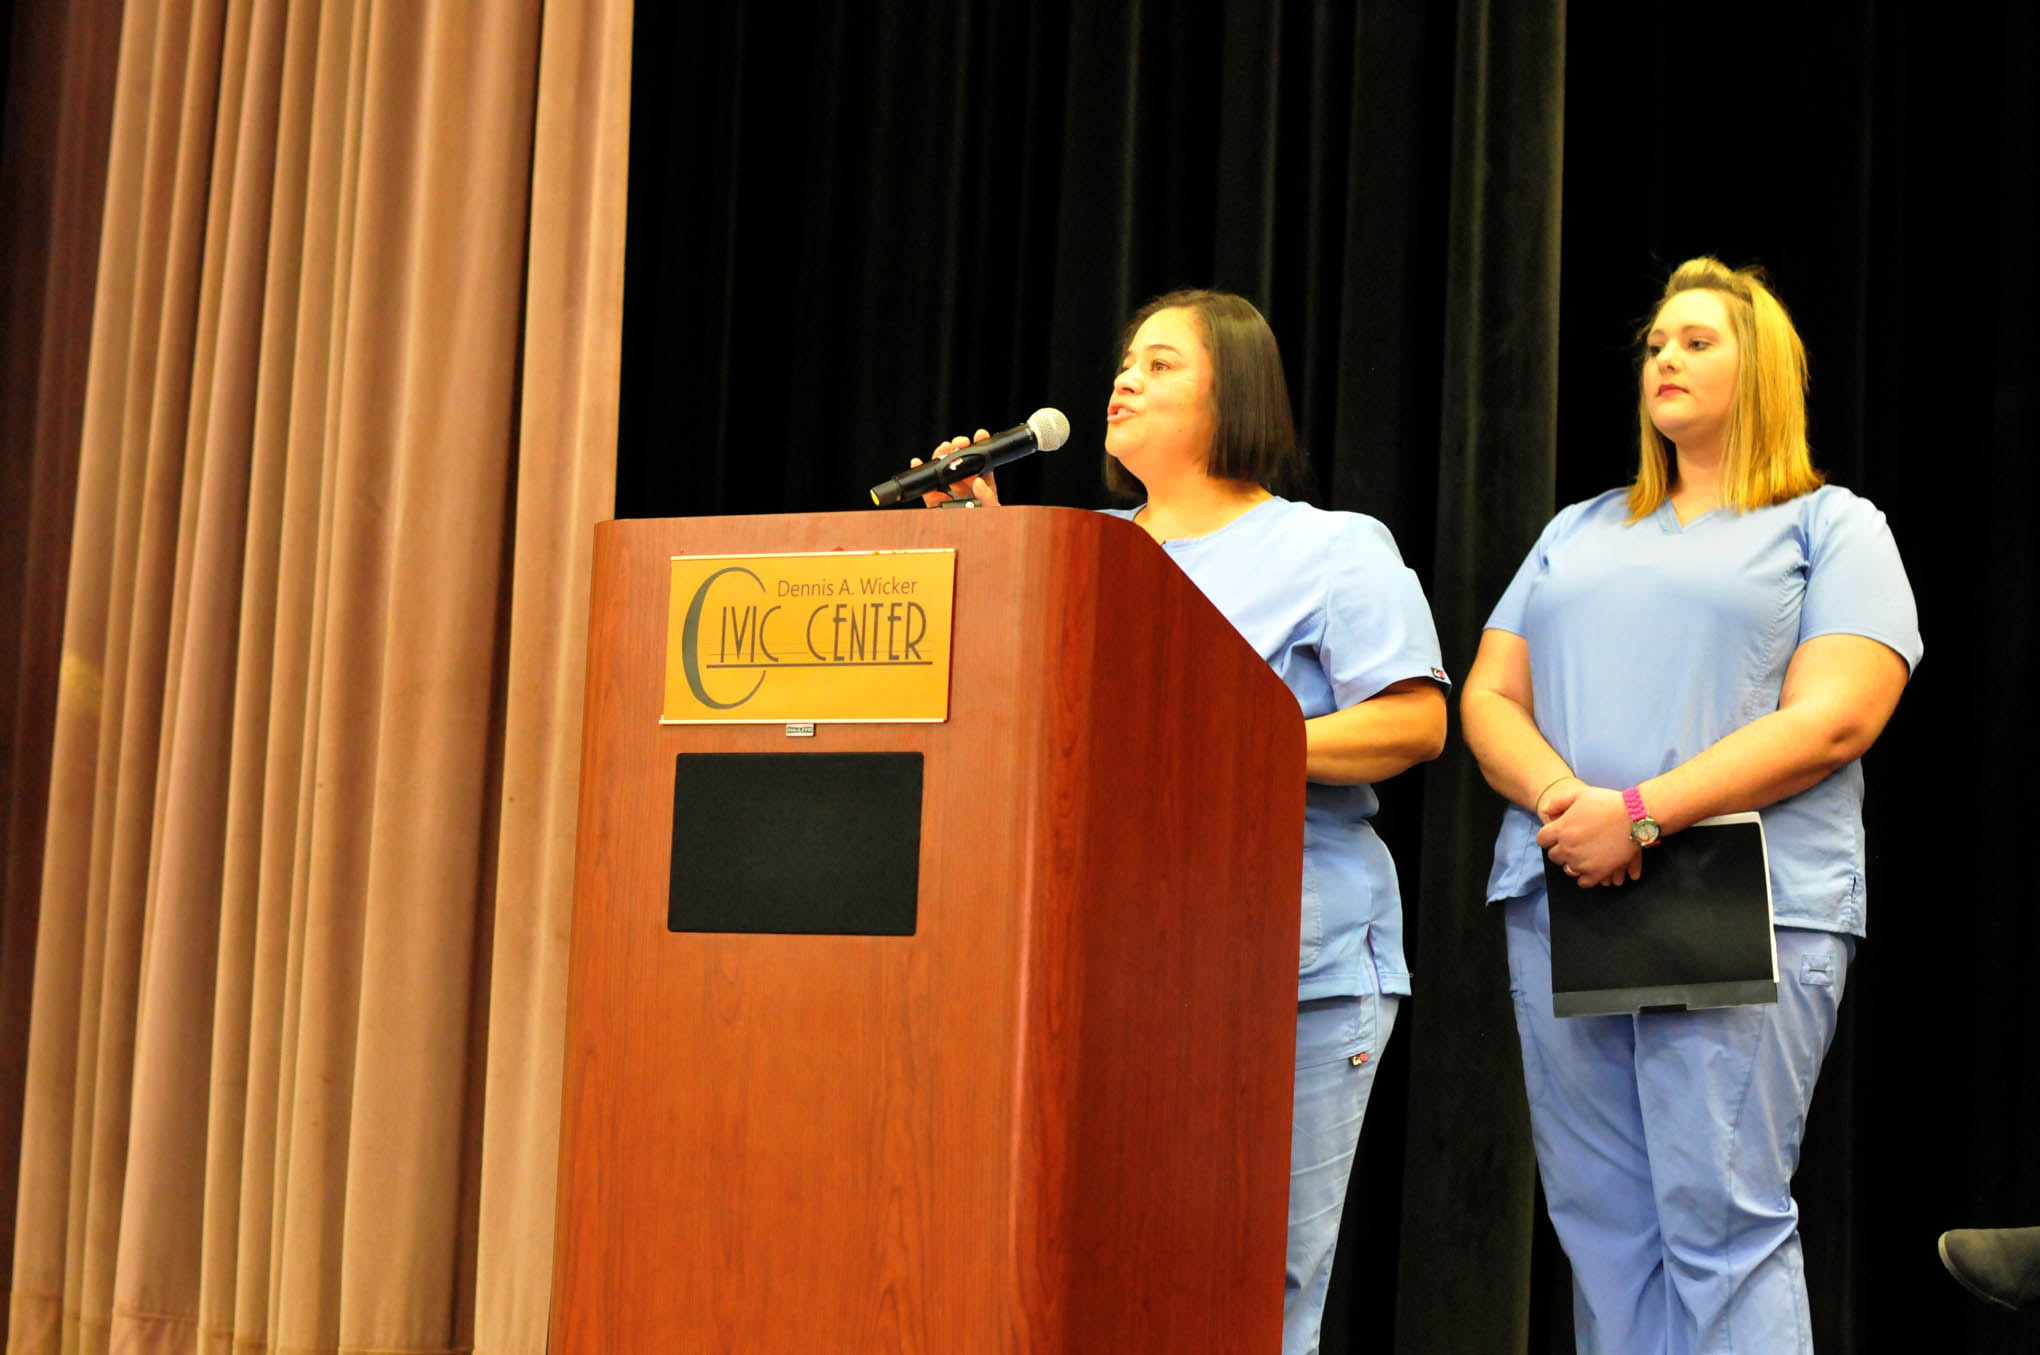 Approximately 475 graduate from CCCC's Continuing Education Medical Programs